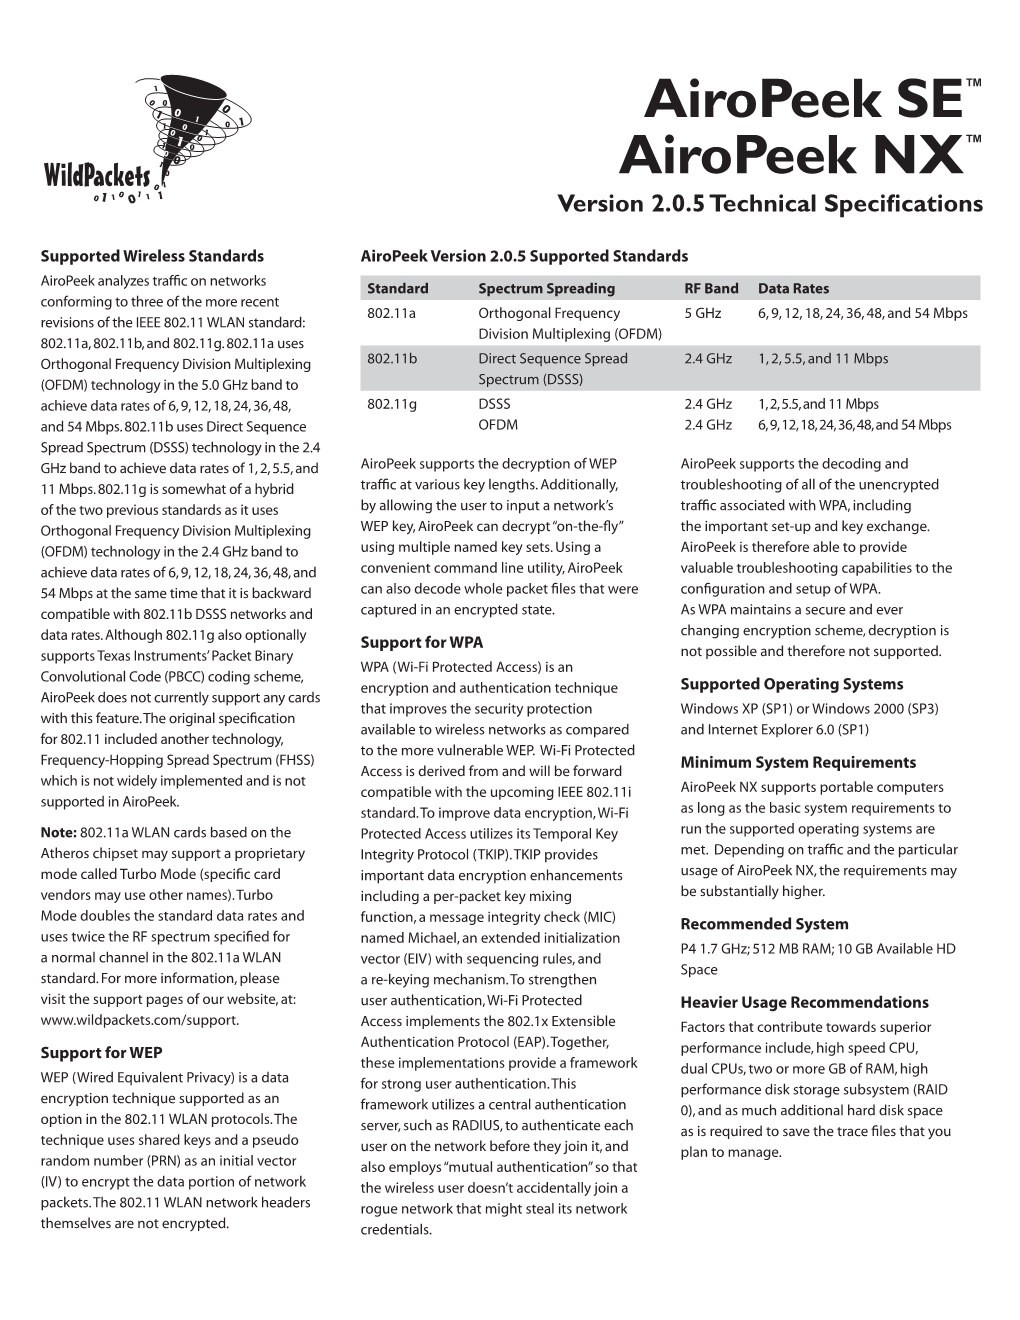 Airopeek Technical Specifications